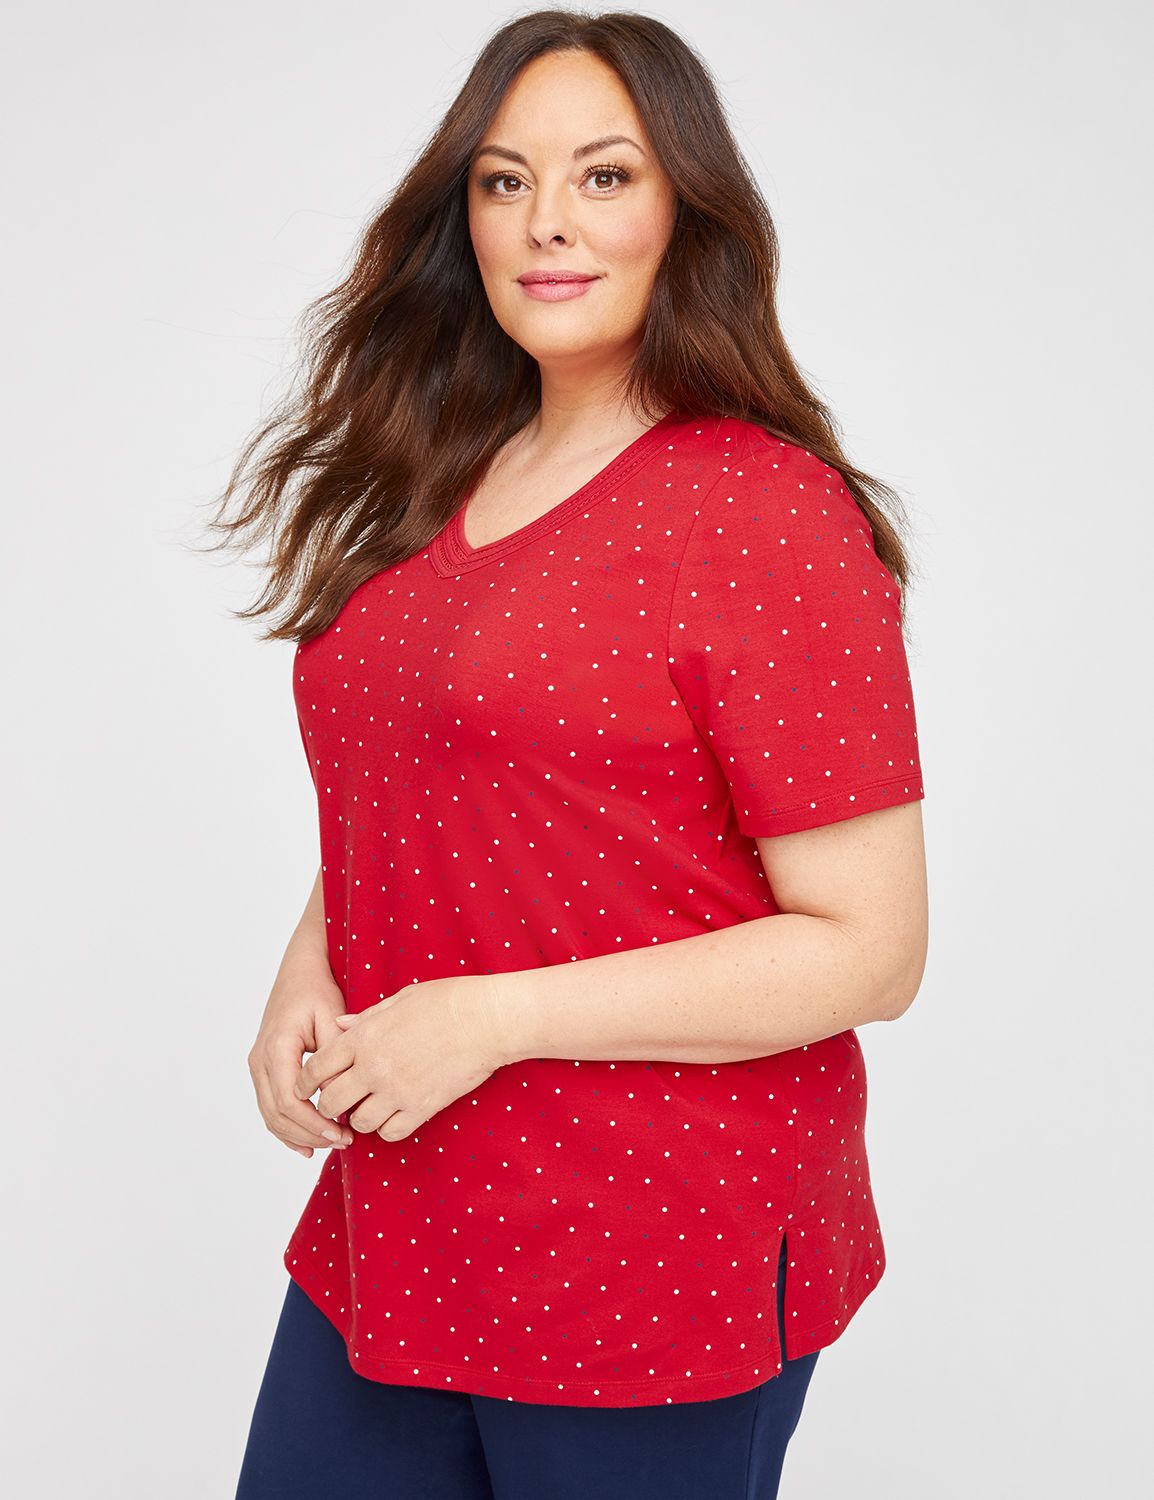 red and white polka dot shirt plus size